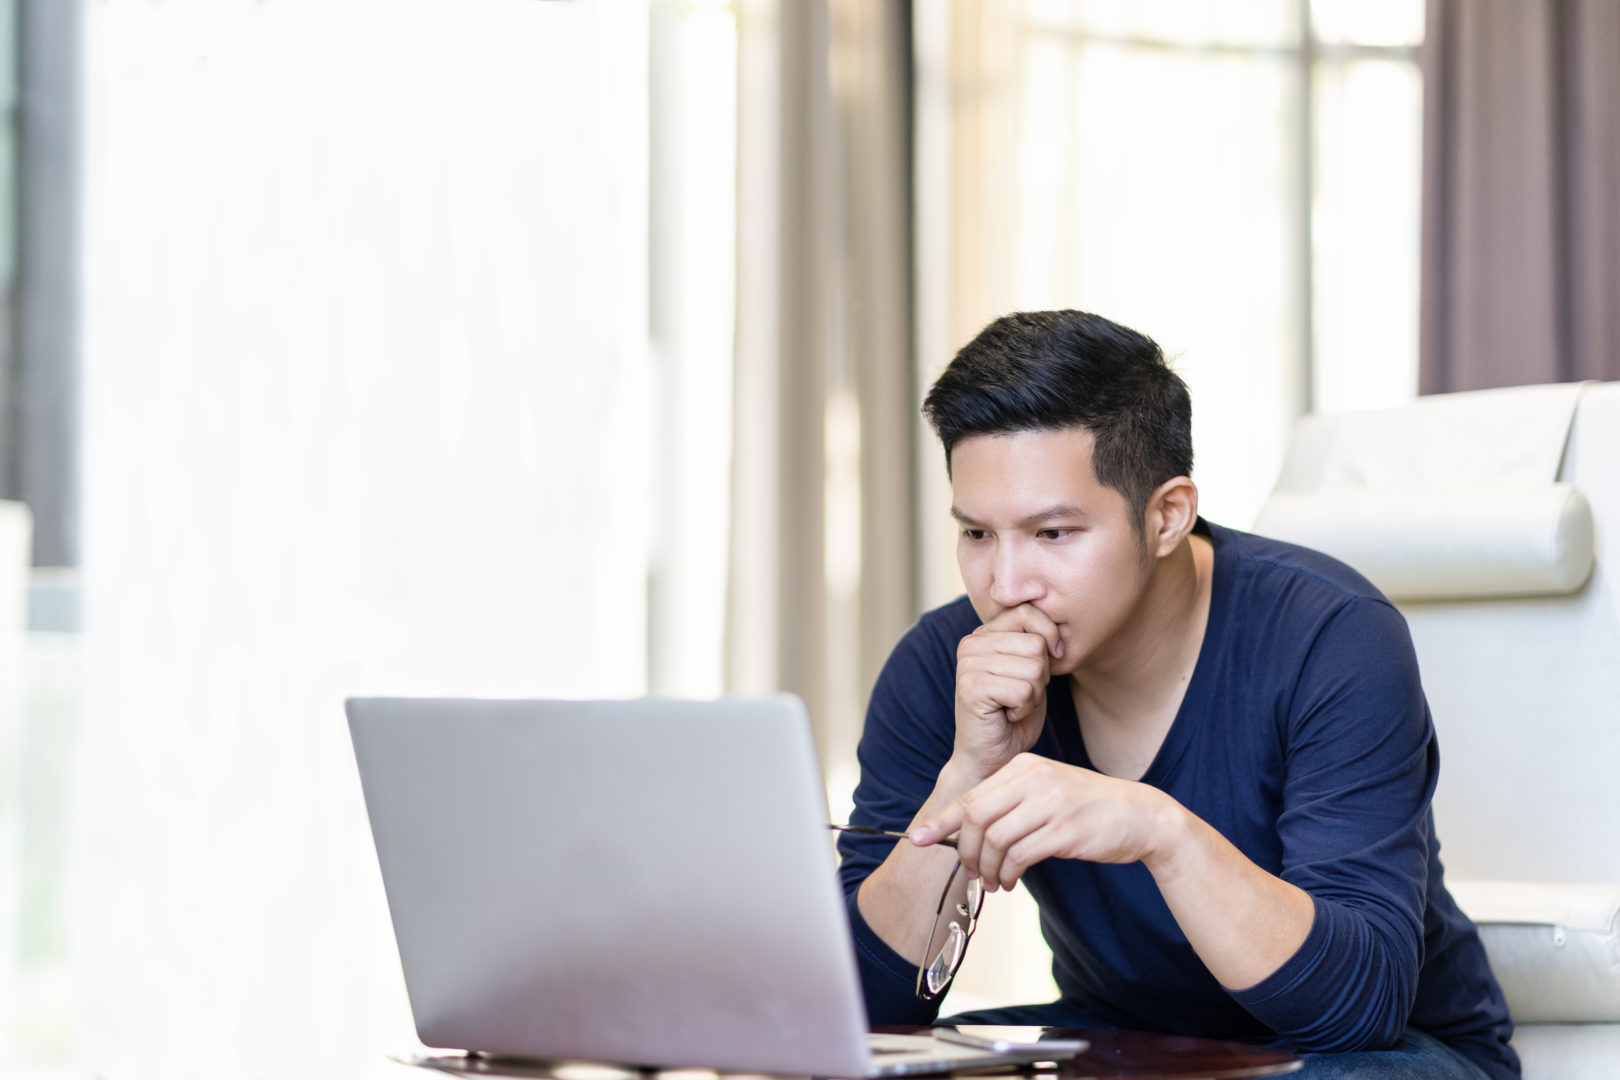 Image of a man working from a laptop